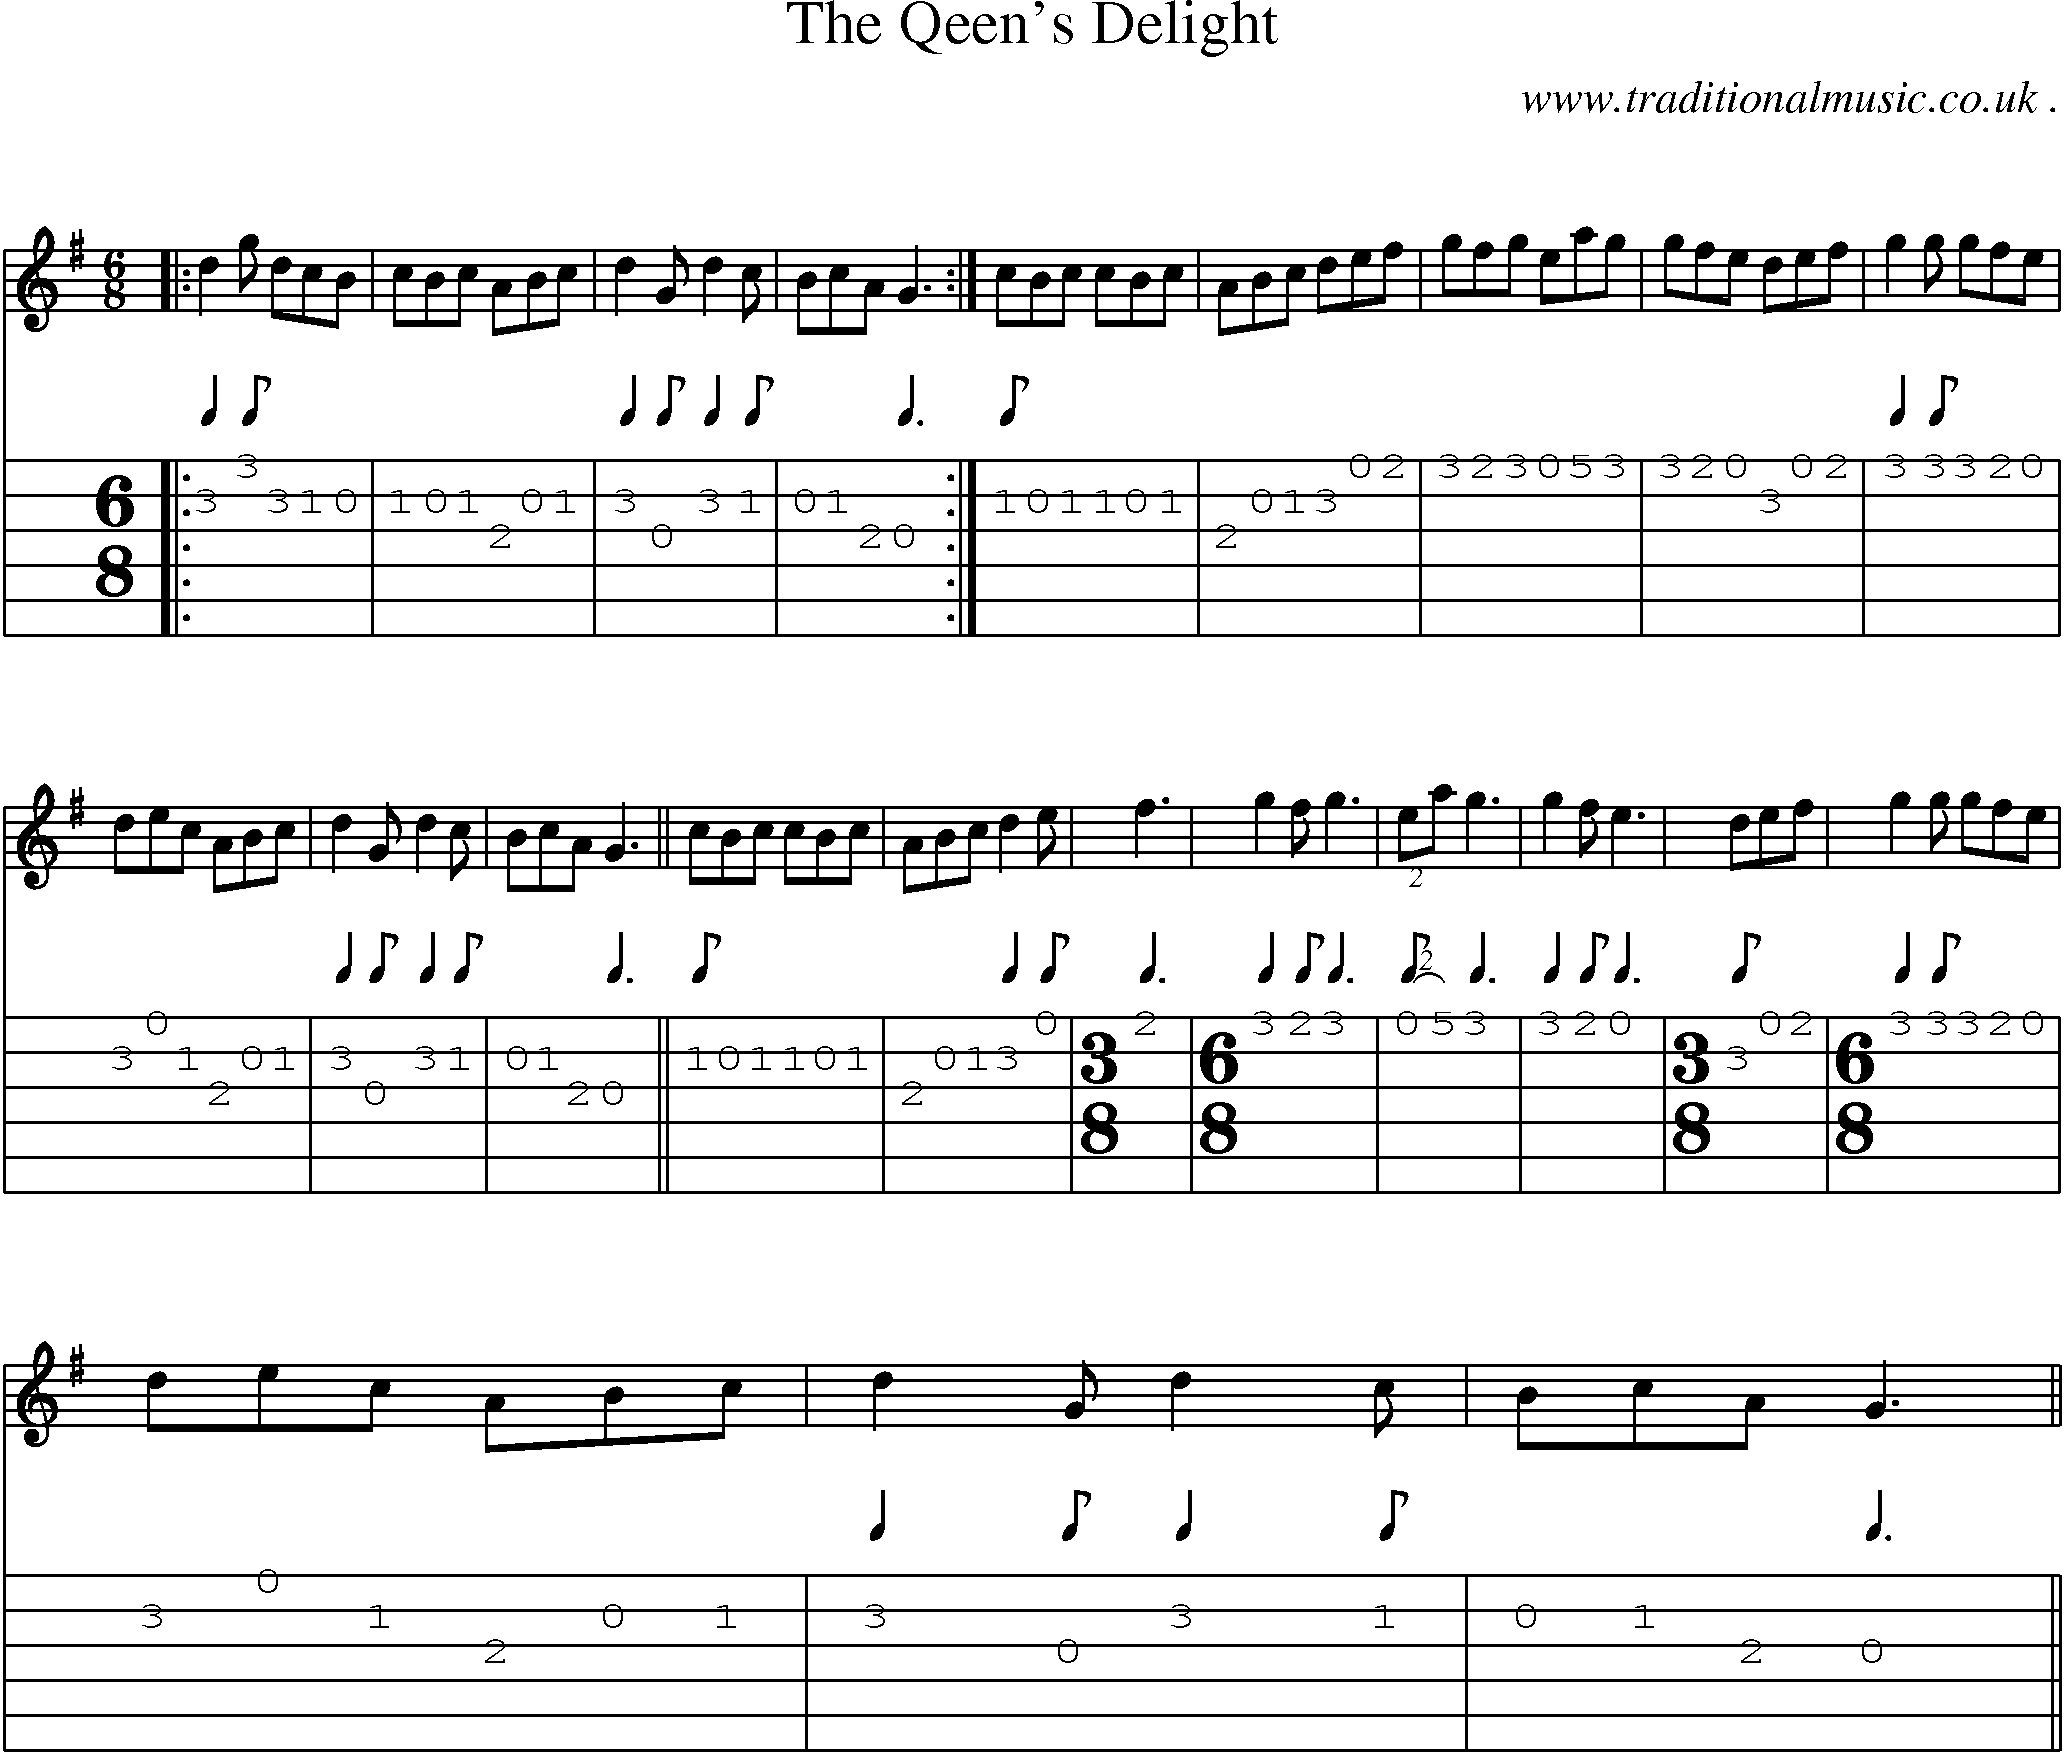 Sheet-Music and Guitar Tabs for The Qeens Delight